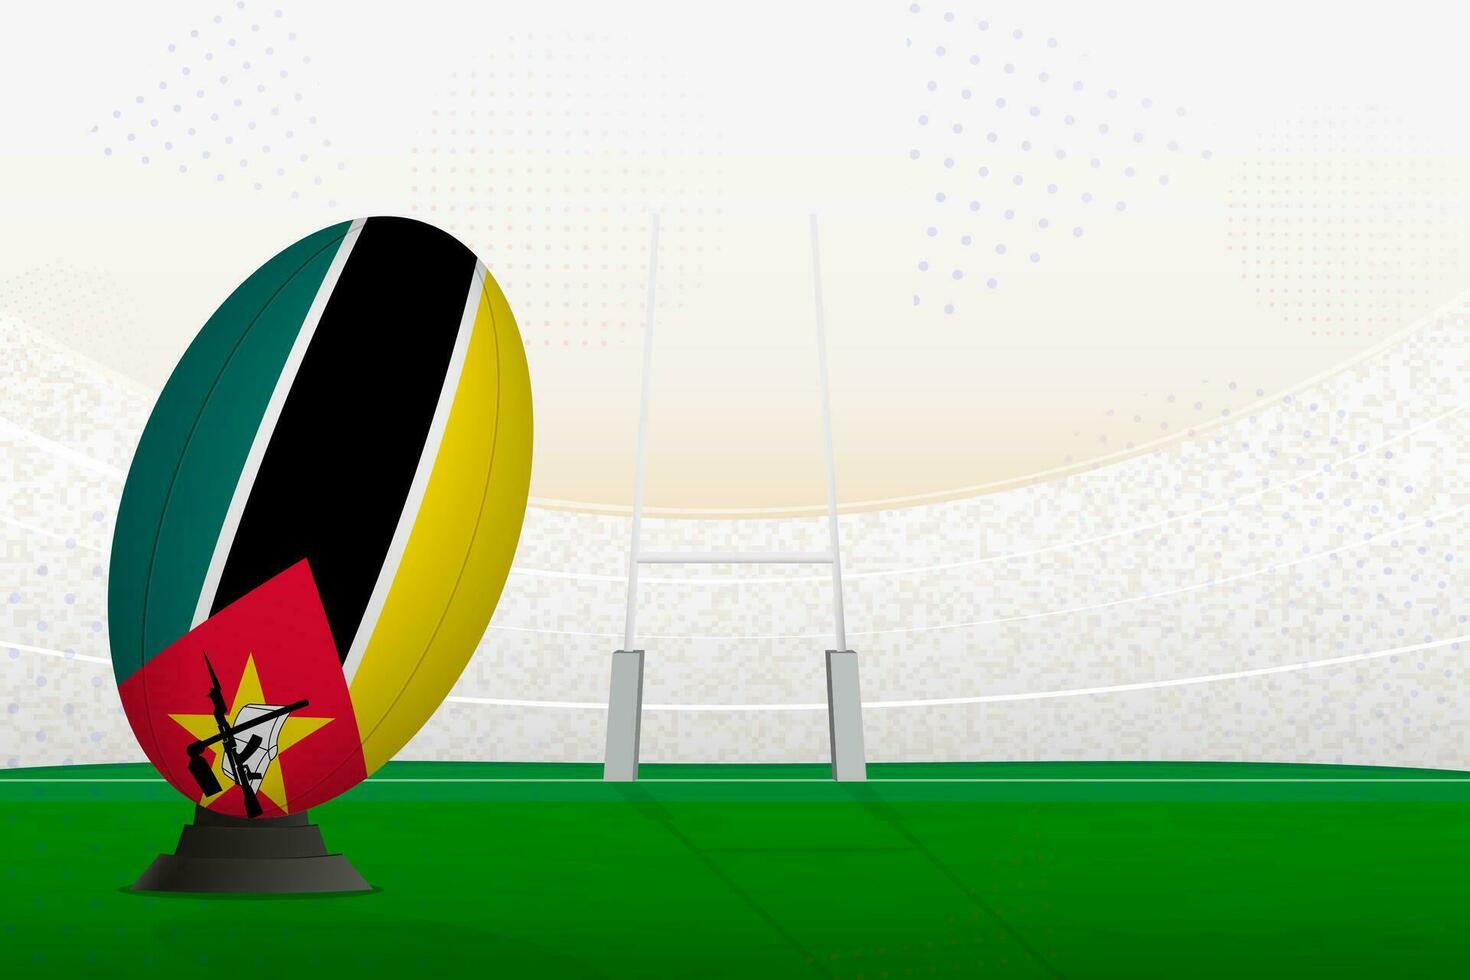 Mozambique national team rugby ball on rugby stadium and goal posts, preparing for a penalty or free kick. vector